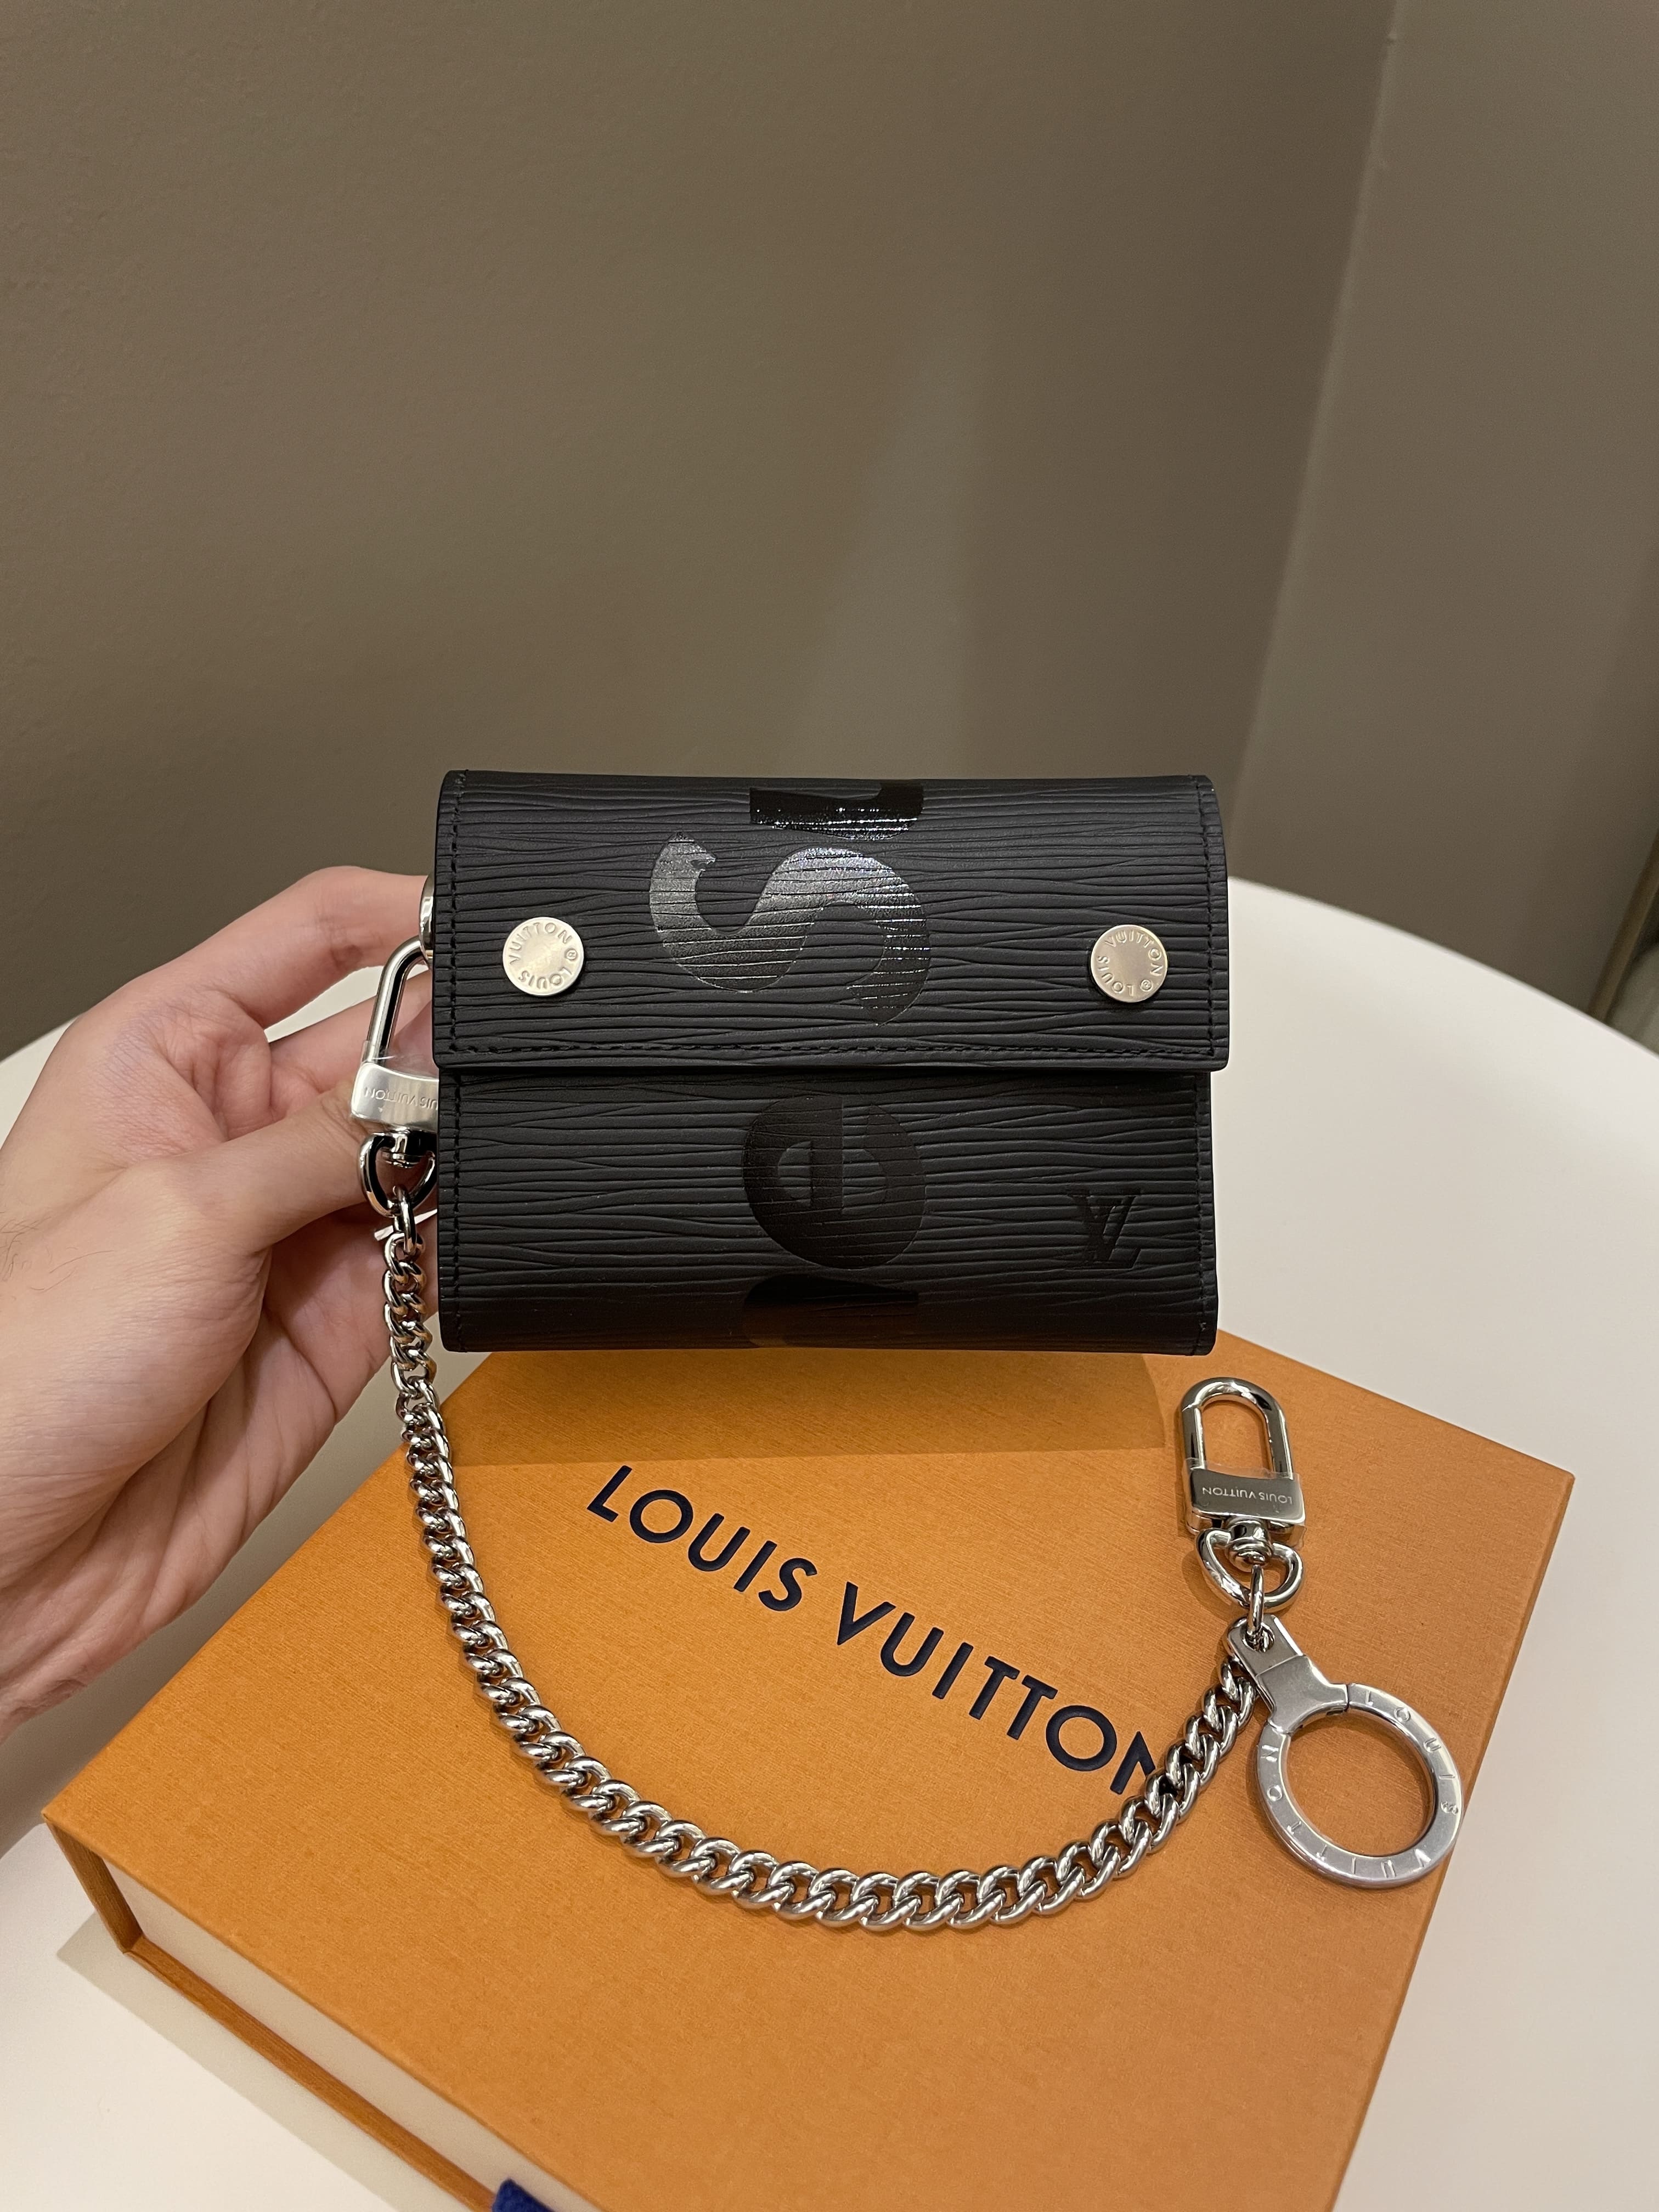 Louis Vuitton and Supreme Chain Wallet